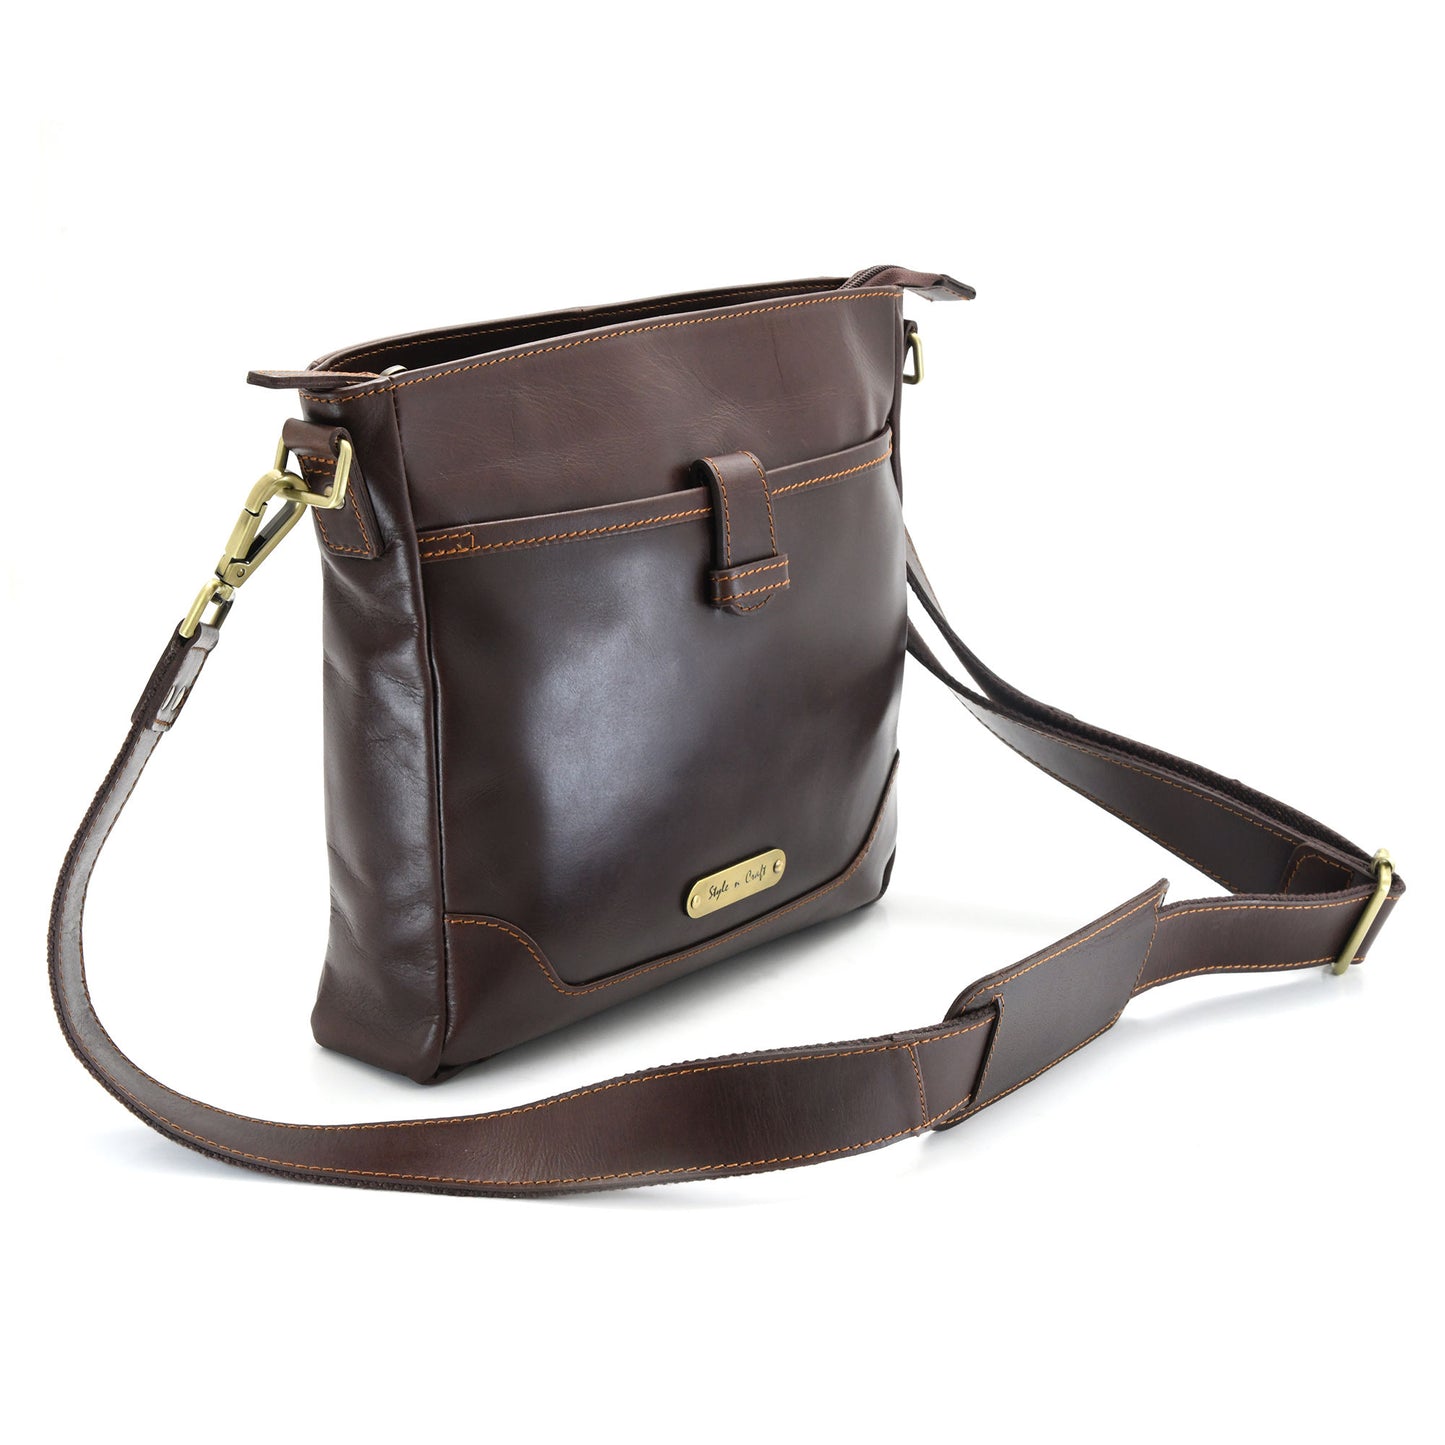 Style n Craft 392001 Cross-body Messenger Bag in Full Grain Dark Brown Leather - Front Angled View